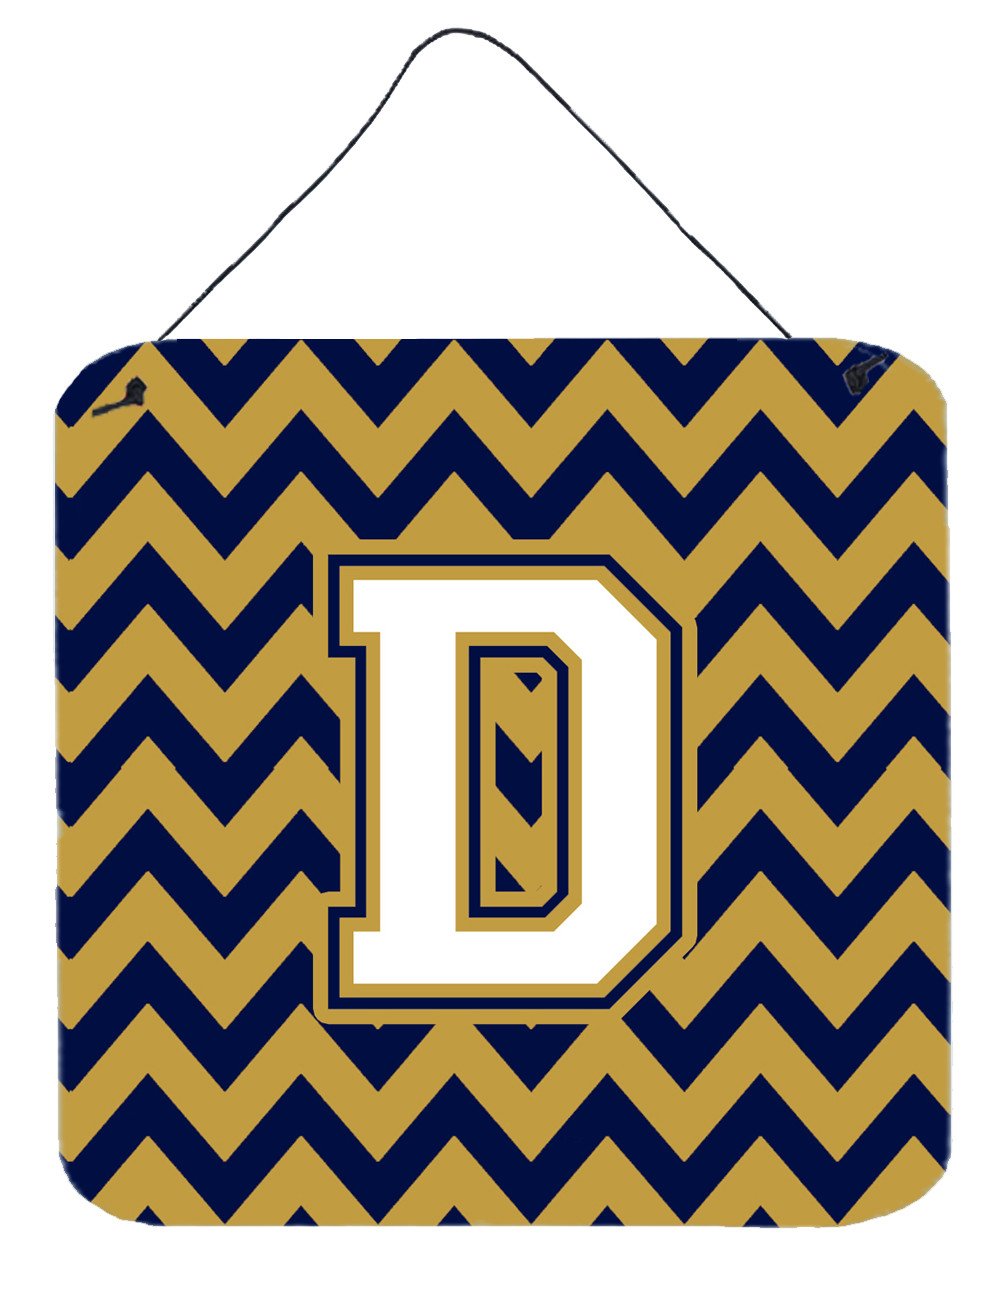 Letter D Chevron Navy Blue and Gold Wall or Door Hanging Prints CJ1057-DDS66 by Caroline's Treasures